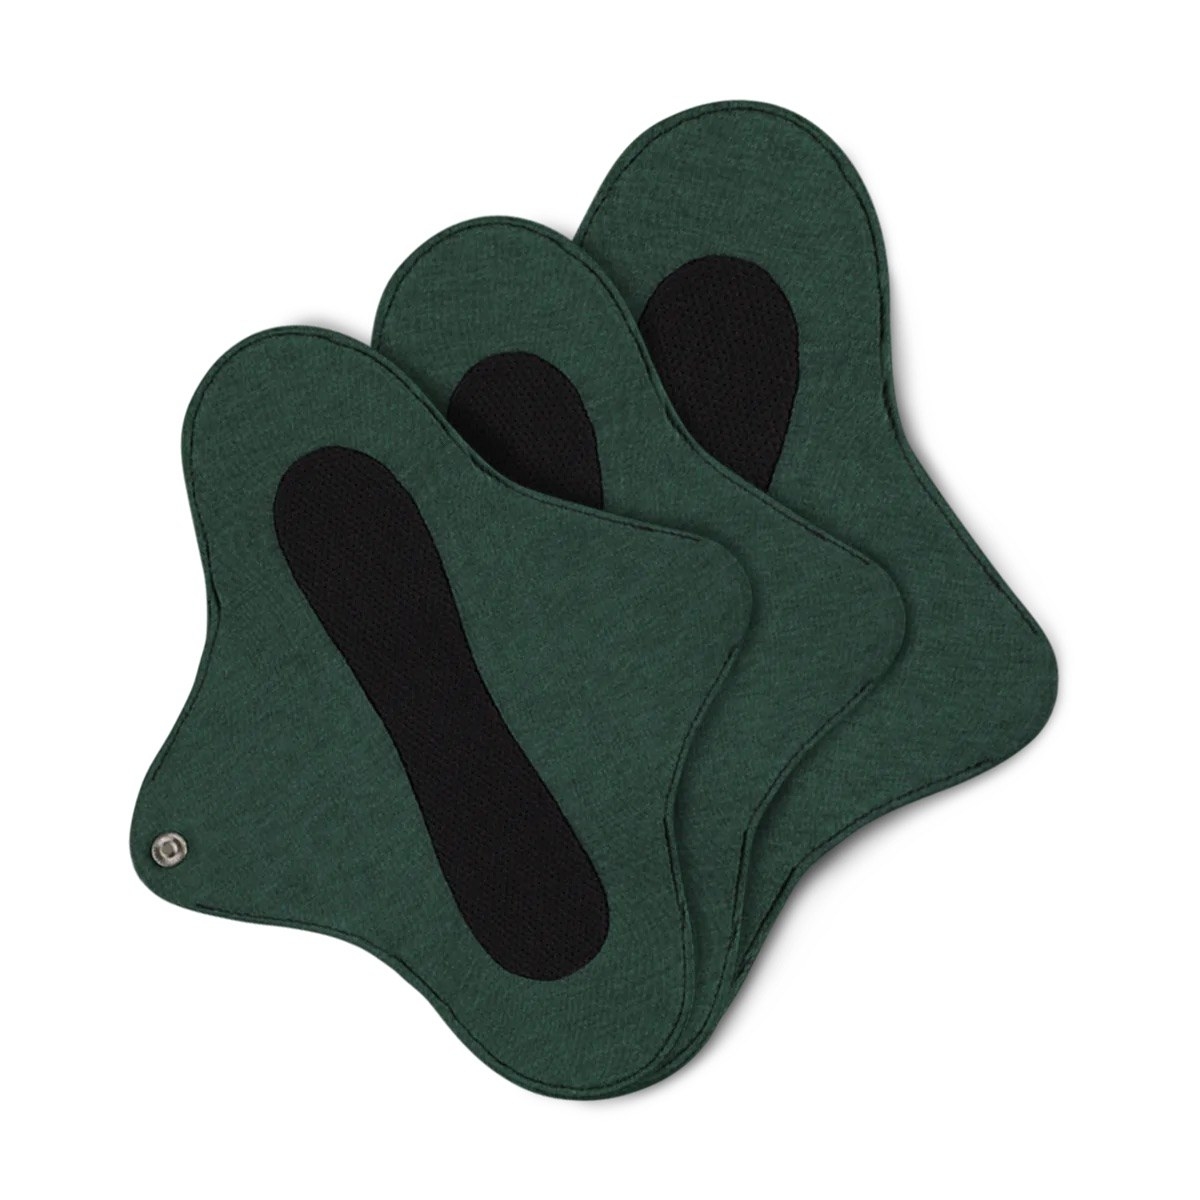 Three dame reusable pads in green